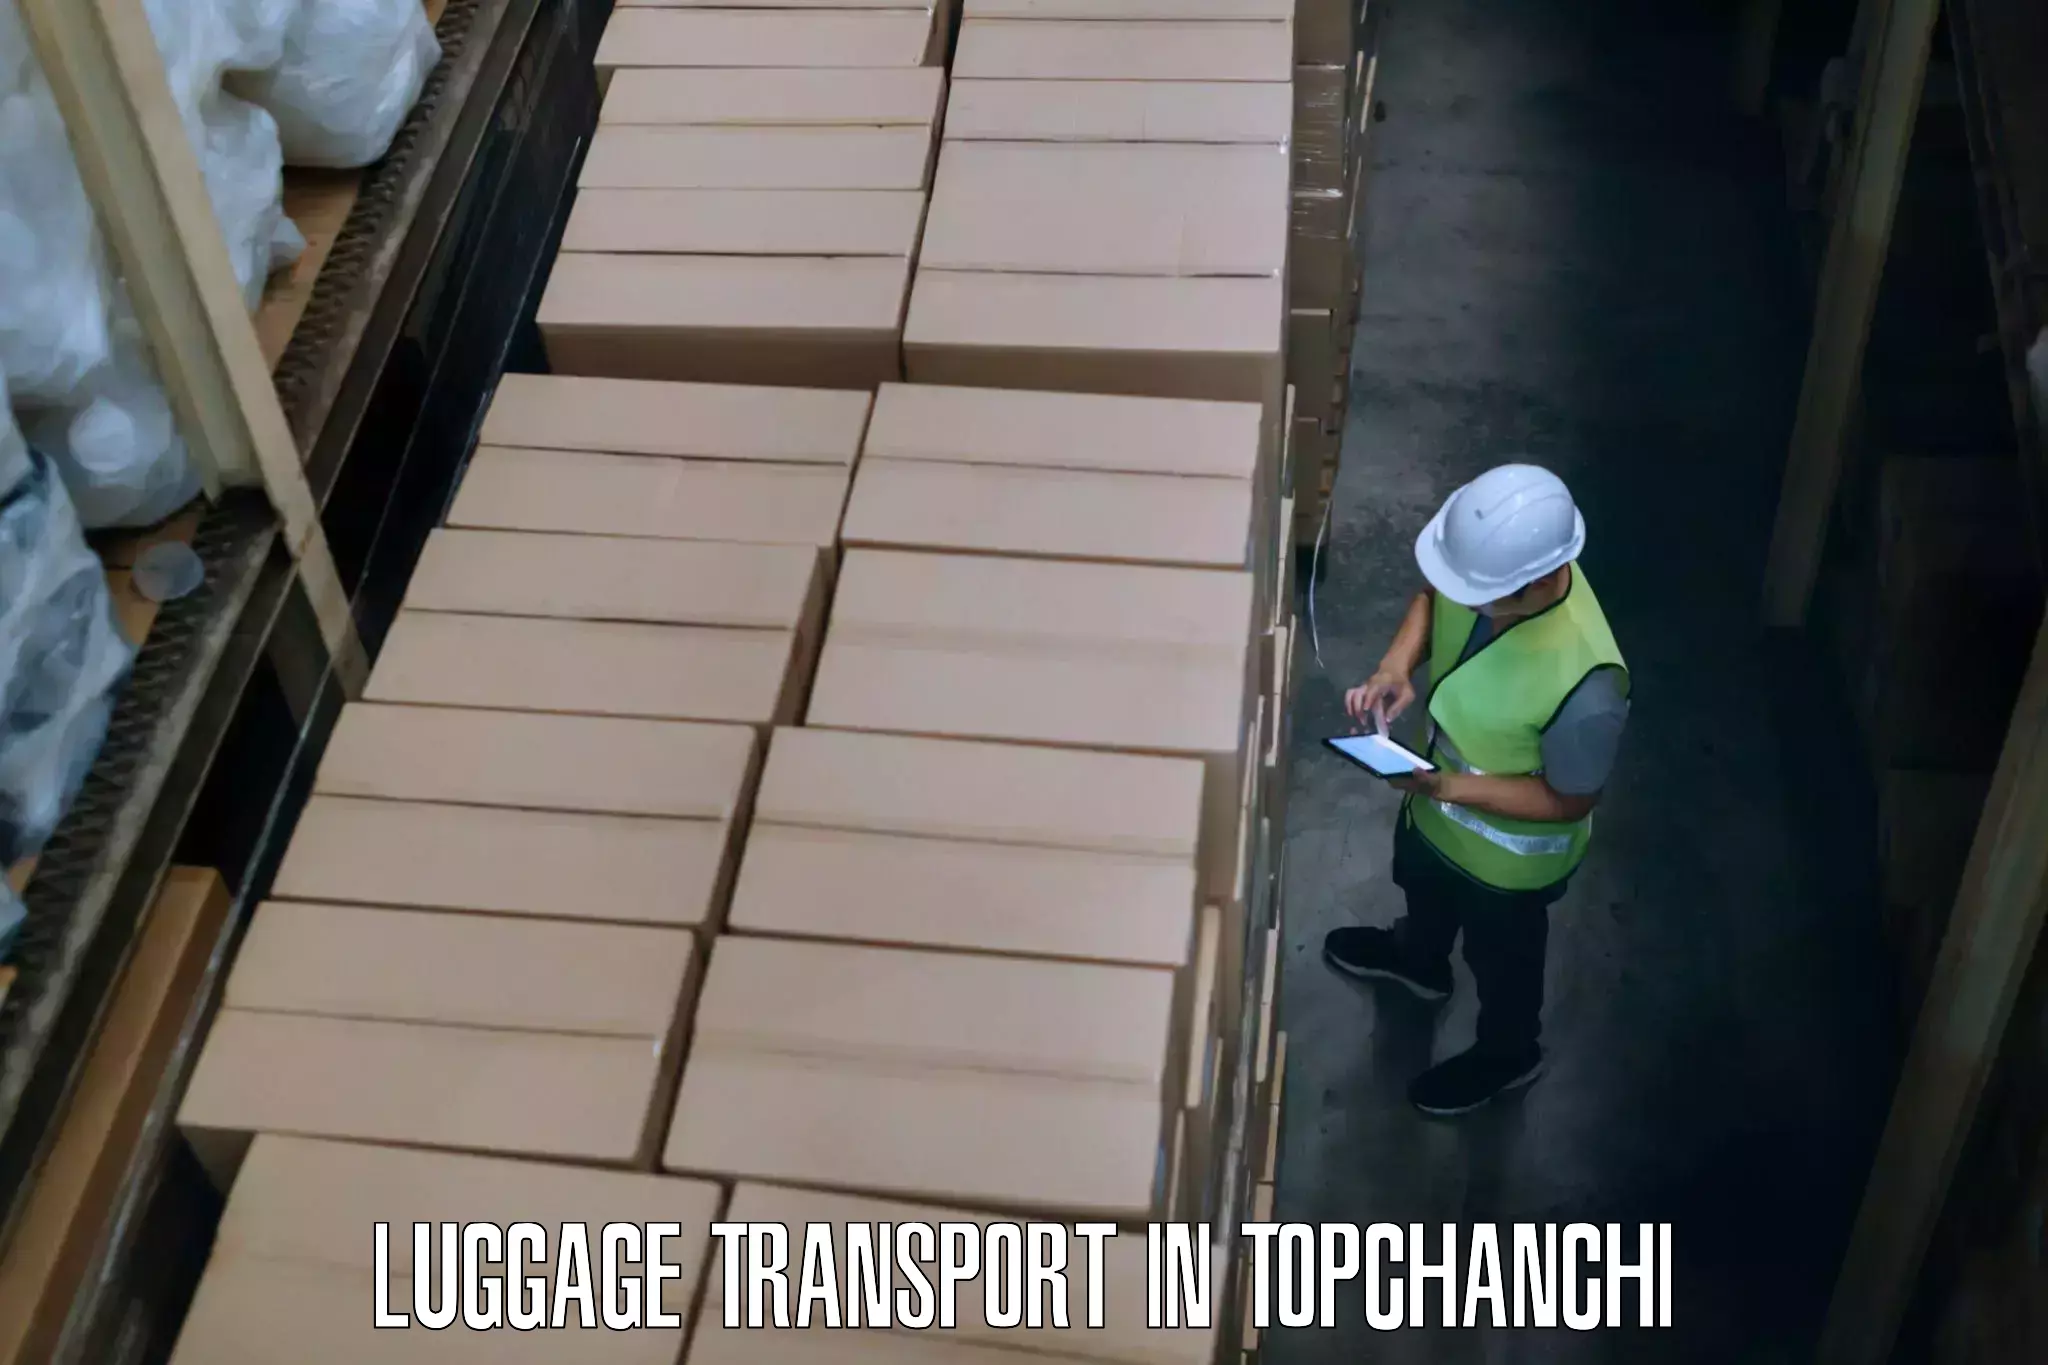 Baggage transport technology in Topchanchi